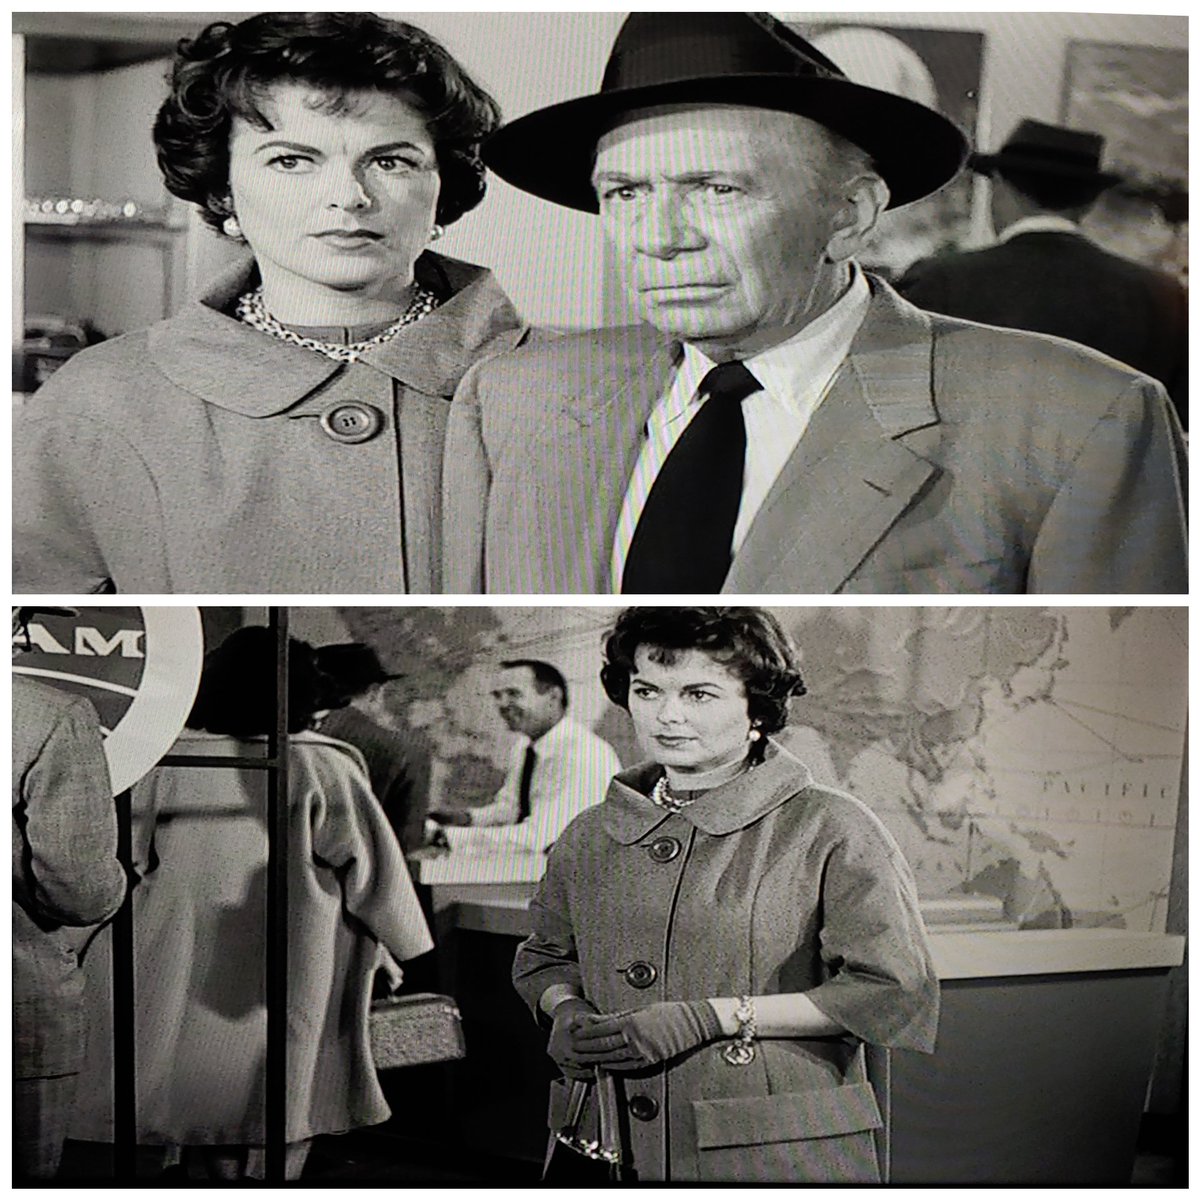 I can't save it for #FashionFriday. I ♥️ Della's outfit! #DellaStreet #LtTragg #PerryMason
#BarbaraHale #RayCollins #style #classic #fashion